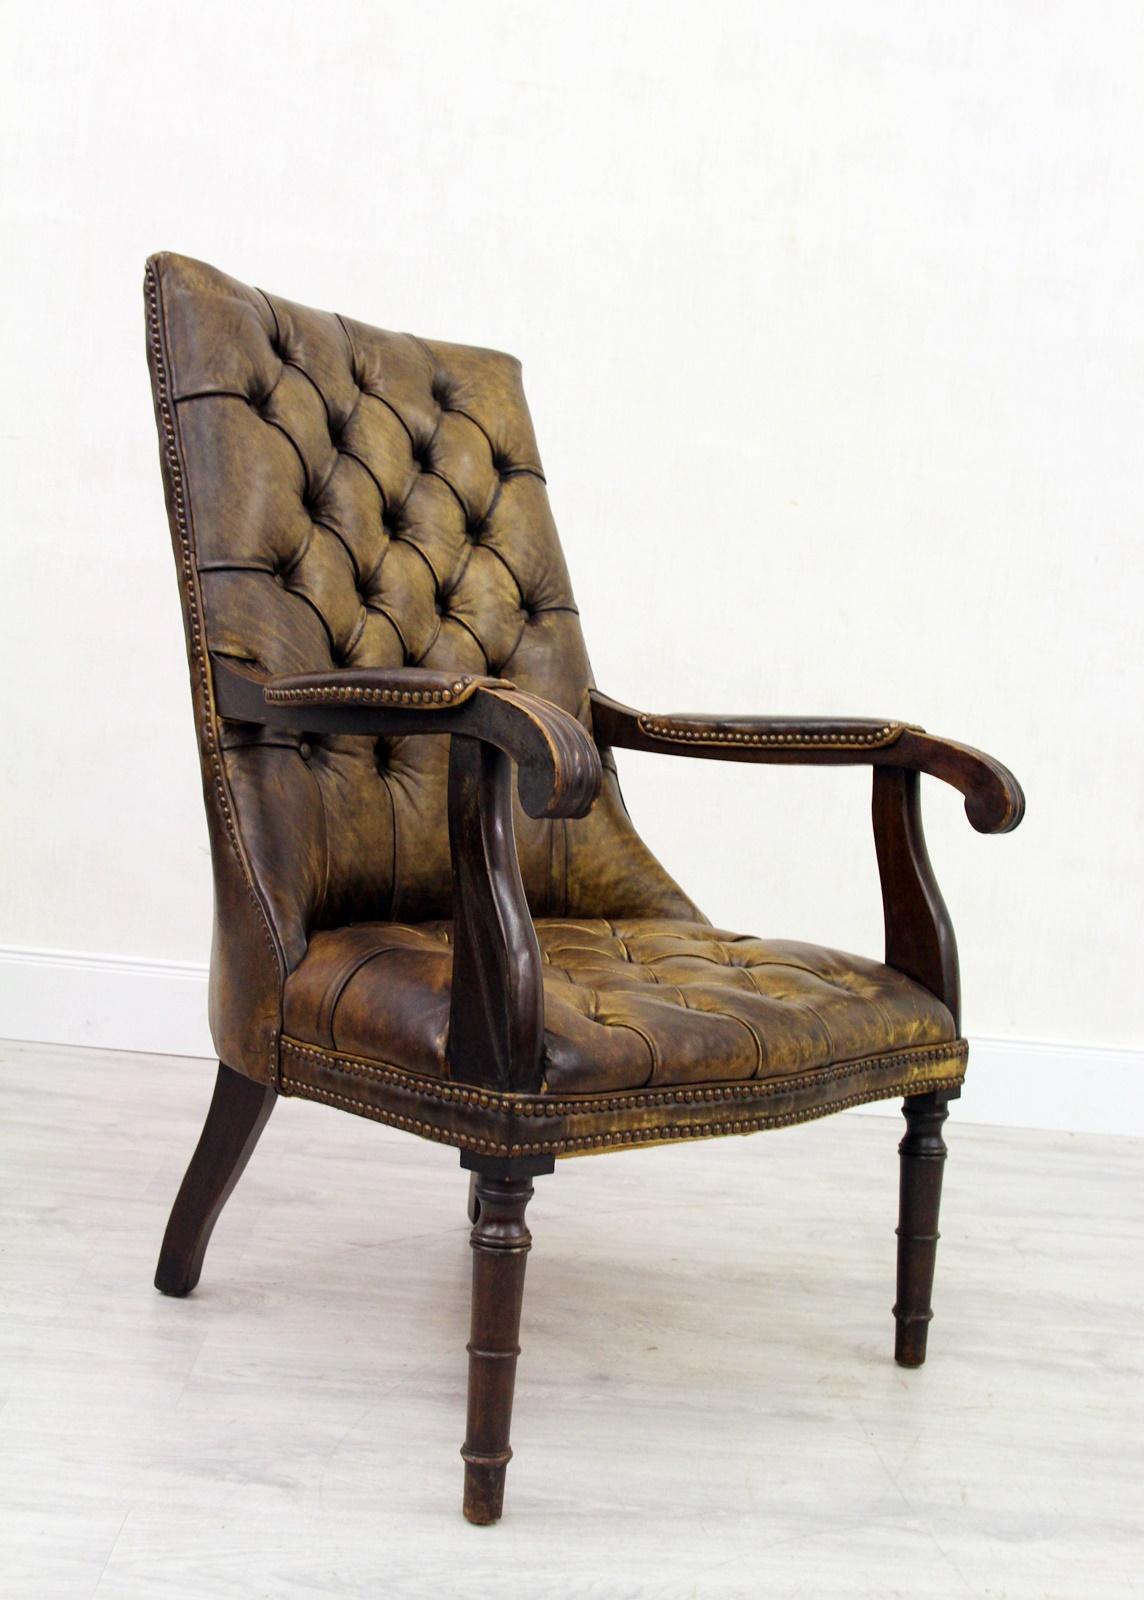 2 Chesterfield Chippendale Wing Chair Armchair Baroque Antique For Sale 6